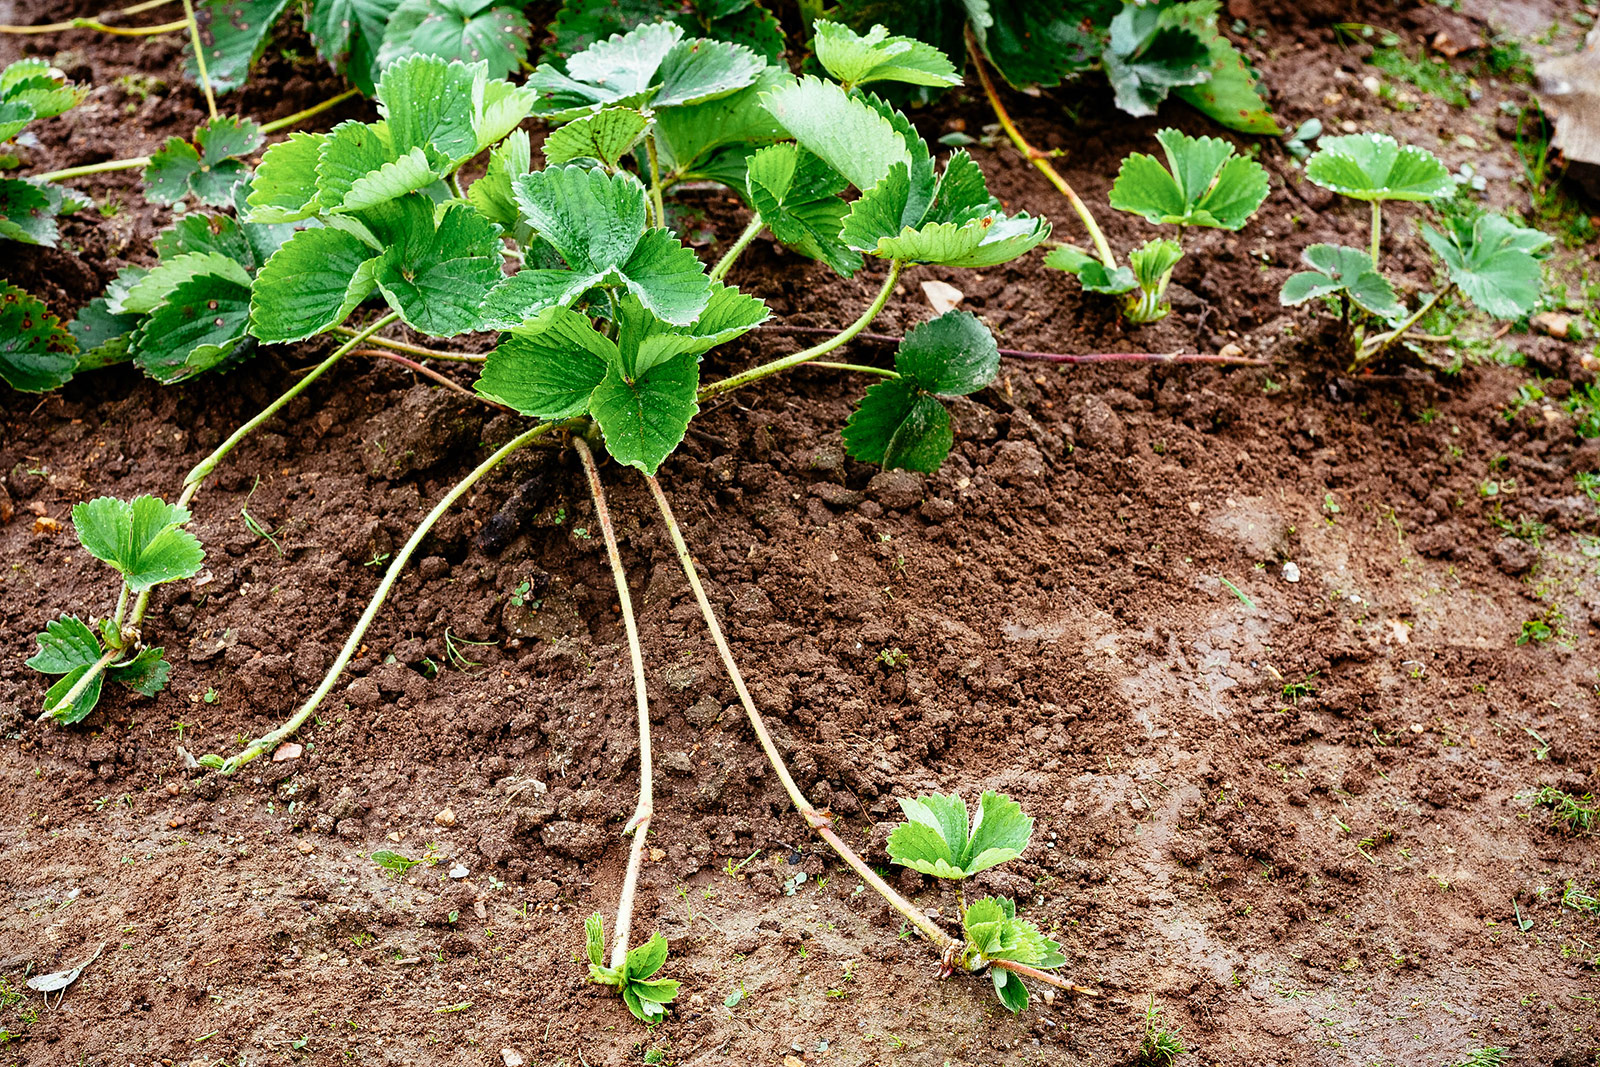 Strawberry plant with several runners (plantlets) sprawled across the soil